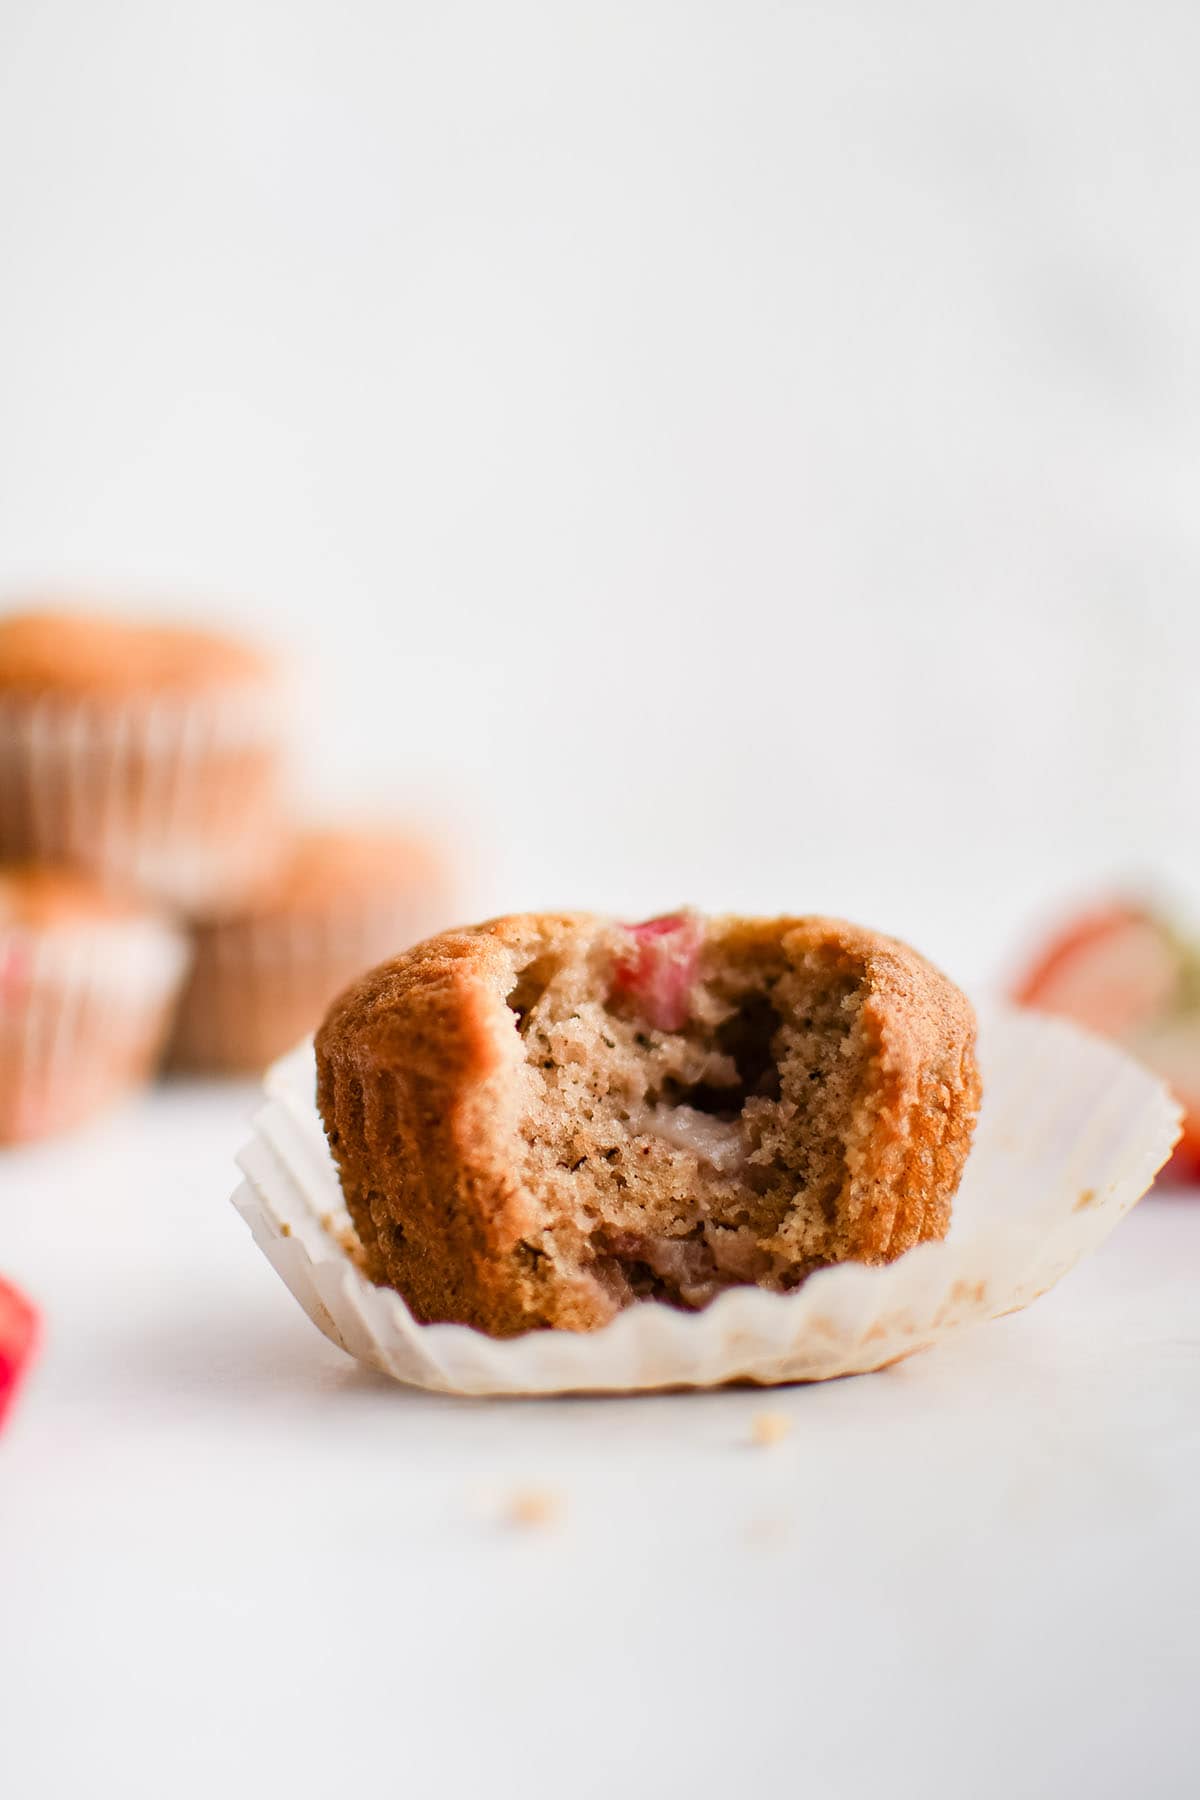 strawberry banana muffin on a muffin liner